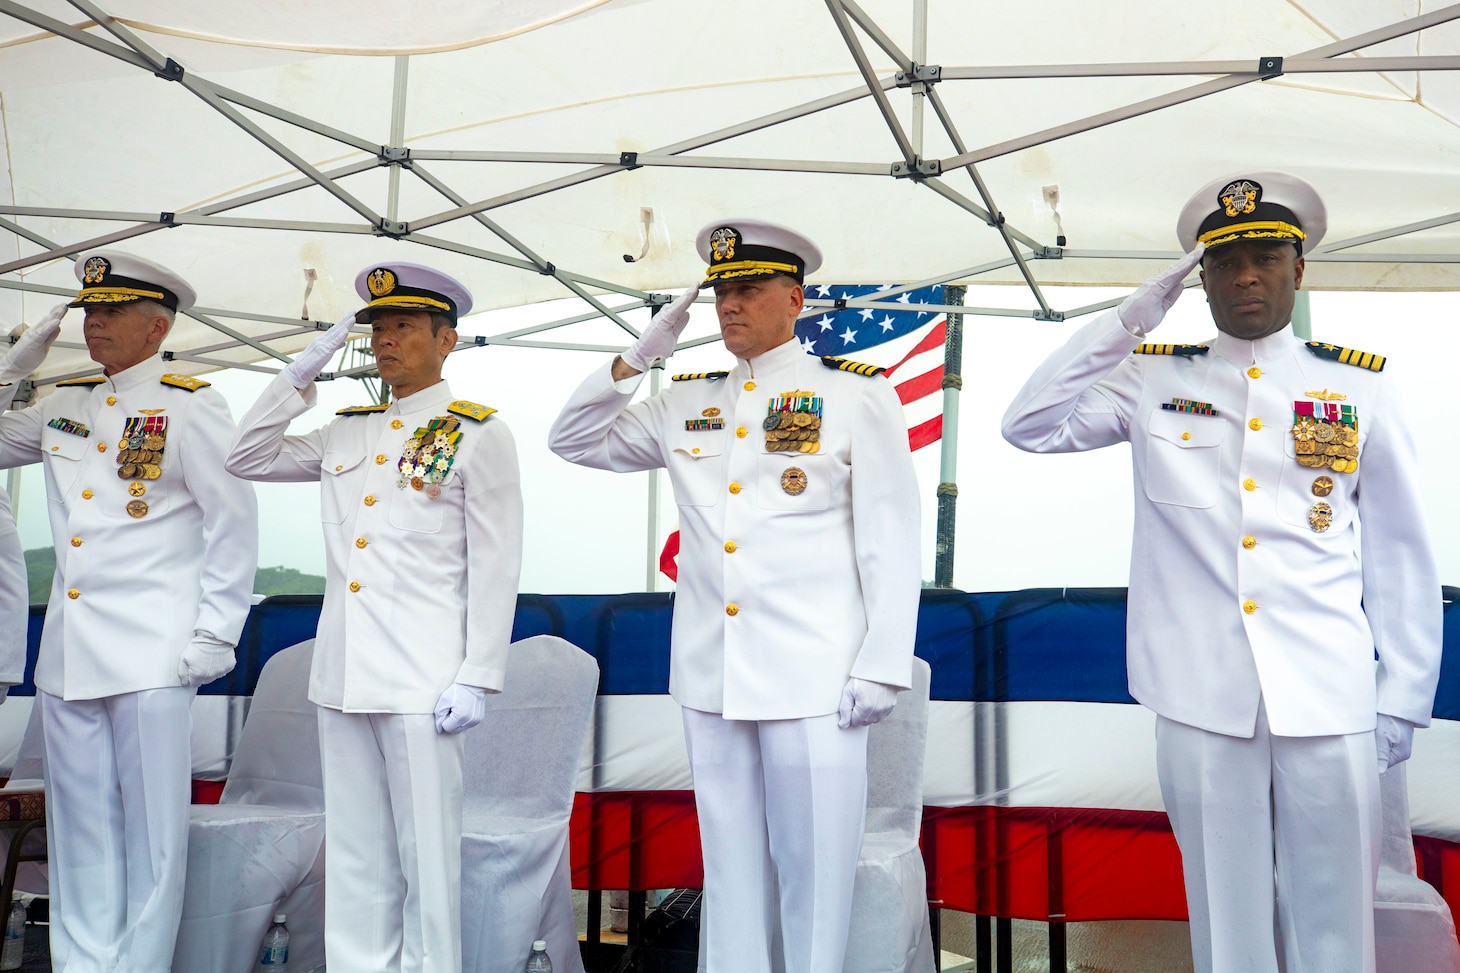 YOKOSUKA, Japan (Aug. 18, 2022) Vice Adm. Karl Thomas, commander, U.S. 7th Fleet, Vice Adm. FUKUDA Tatsuya, commander, Fleet Escort Force, Japan Maritime Self-Defense Force (JMSDF), Capt. Chase Sargeant, outgoing commander, Task Force 71 and Capt. Walter Mainor, incoming commander, Task Force 71, salute during the playing of the national anthem during Commander, Task Force (CTF) 71/Destroyer Squadron (DESRON) 15 change of command ceremony aboard Arleigh Burke-class guided-missile destroyer USS Benfold (DDG 65) pierside at Commander, Fleet Activities Yokosuka, Aug. 18. Commander, Task Force (CTF) 71/Destroyer Squadron (DESRON) 15 is the Navy’s largest forward-deployed DESRON and the U.S. 7th Fleet’s principal surface force. (U.S. Navy photo by Mass Communication Specialist 3rd Class RuKiyah Mack)